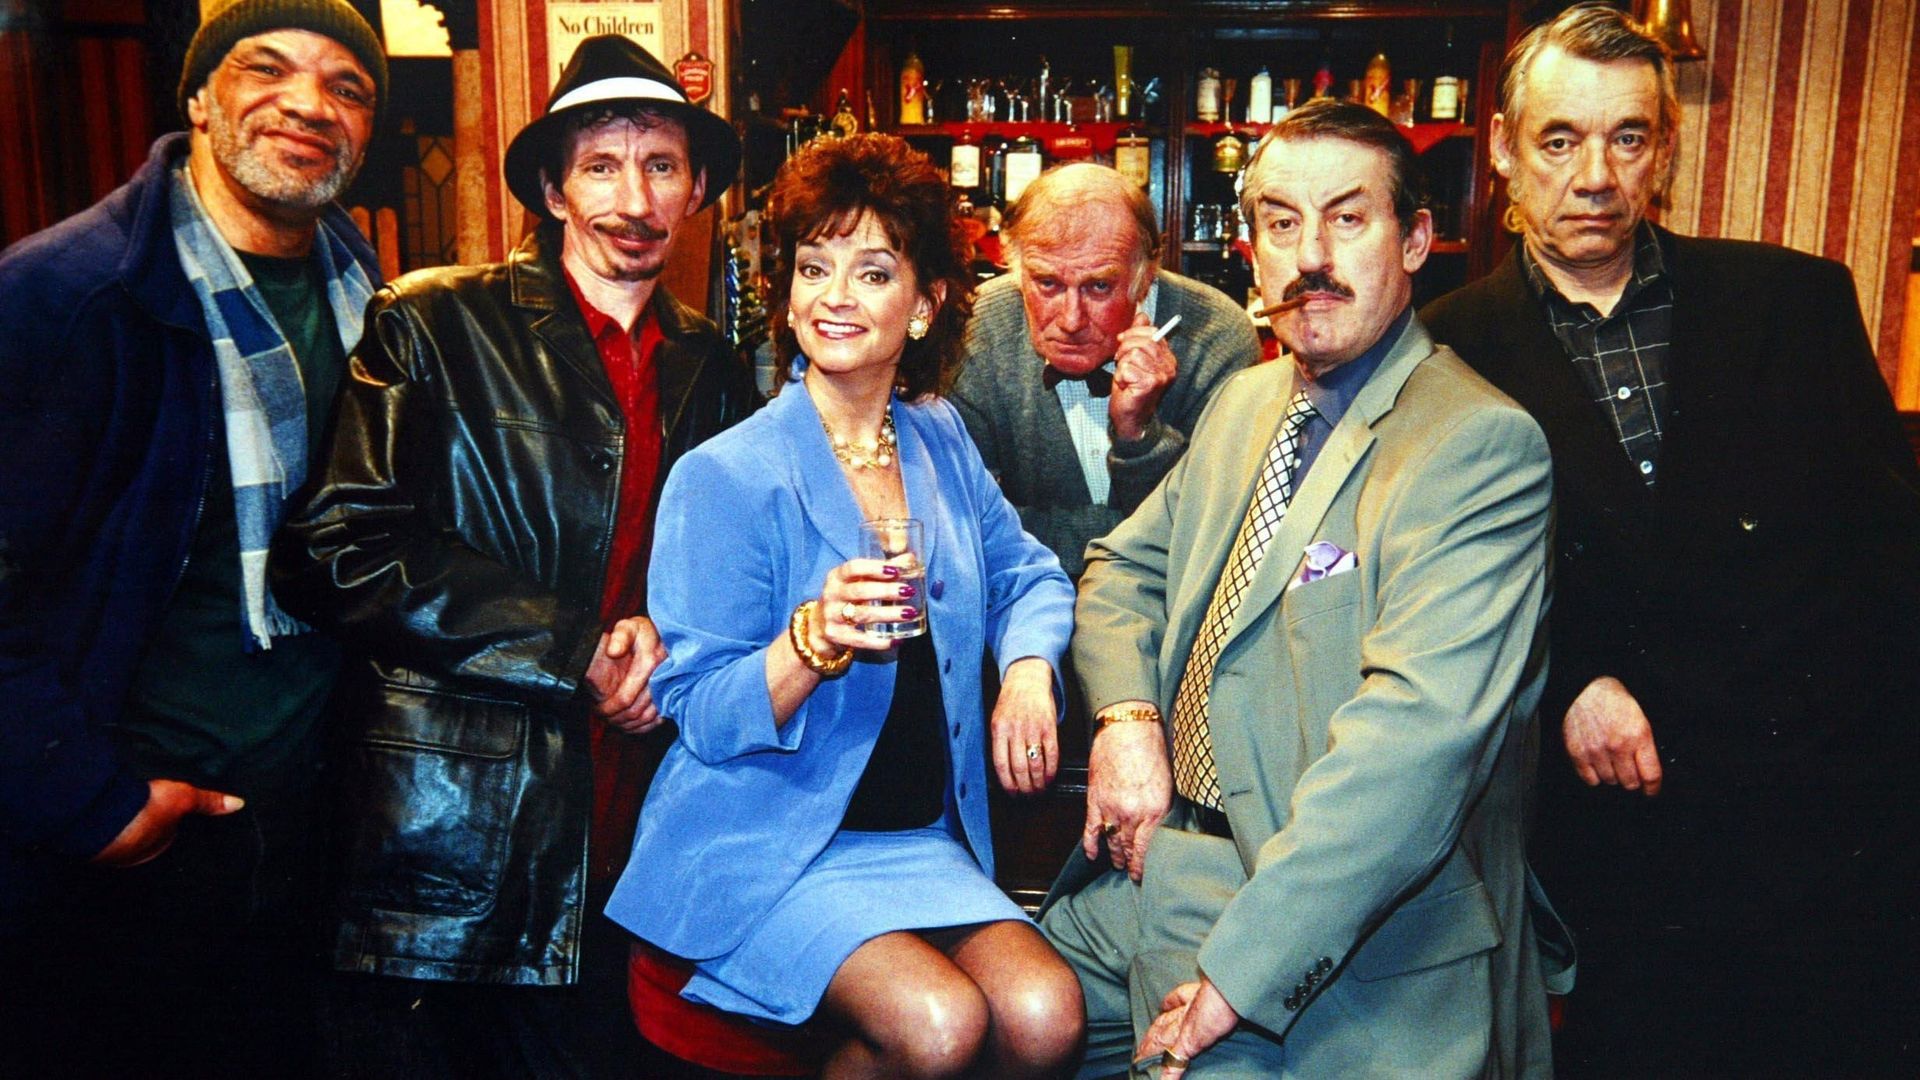 The Story of 'Only Fools and Horses....' background